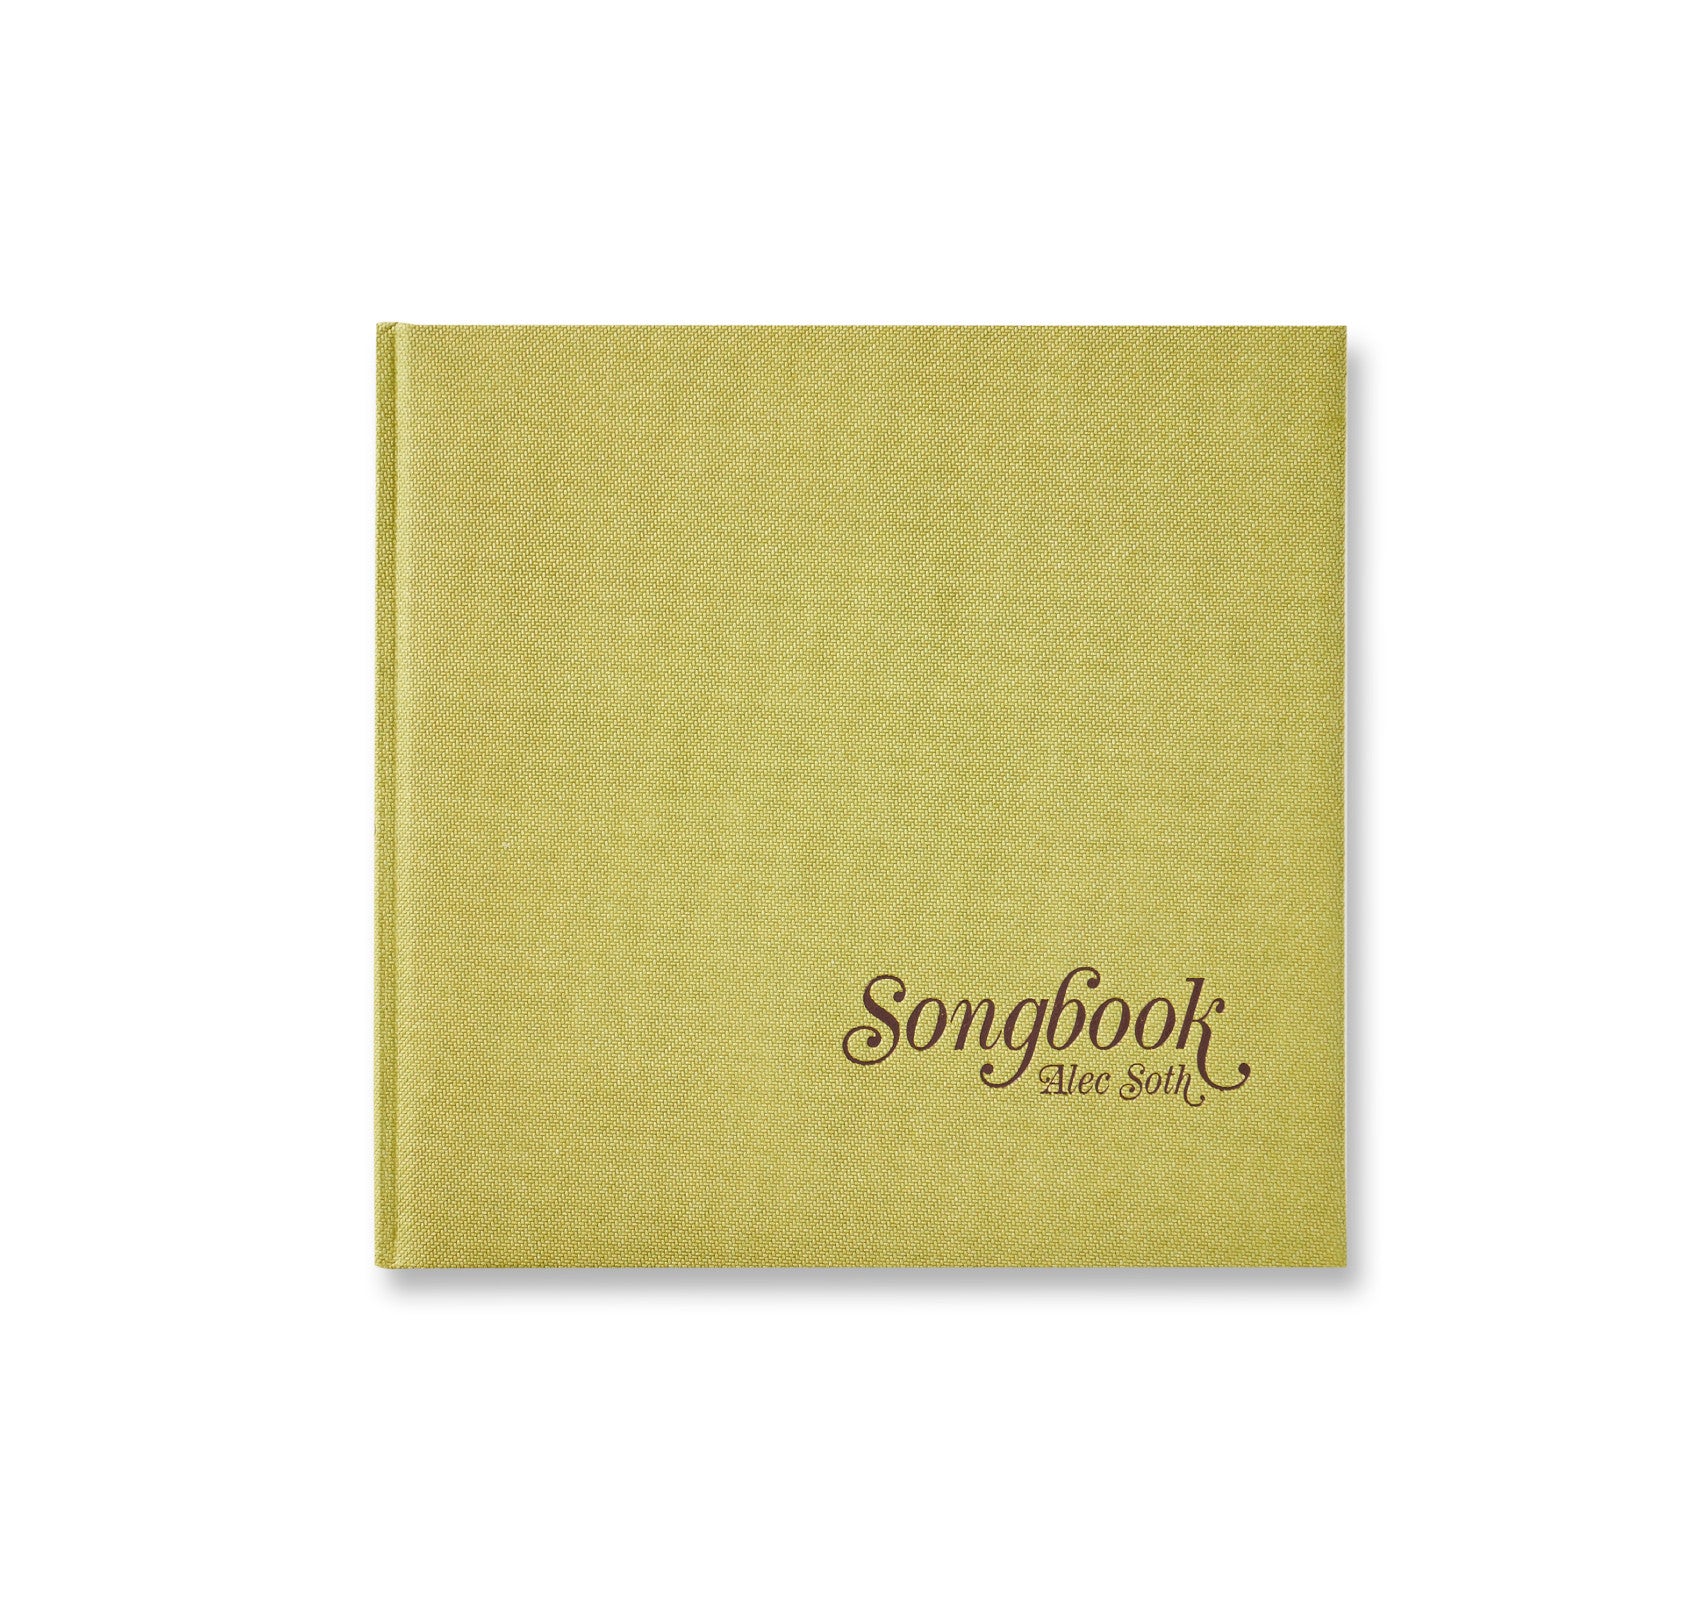 SONGBOOK by Alec Soth [FIRST EDITION, FIRST PRINTING]